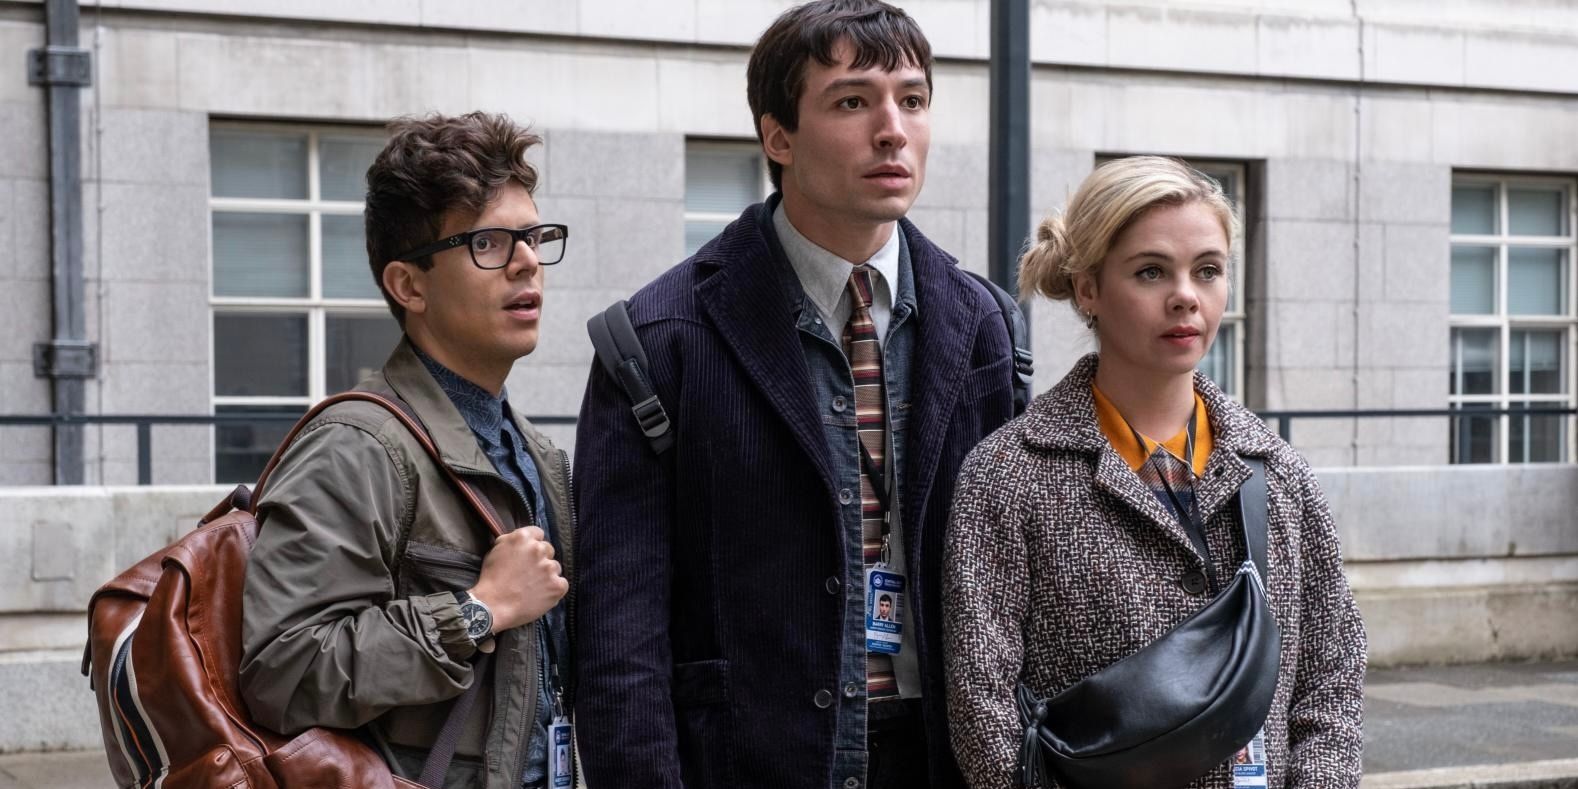 A still from The Flash featuring Albert Desmond (played by Rudy Mancuso), Barry Allen (played by Ezra Miller), and Patty Spivot (played by Saoirse-Monica Jackson).